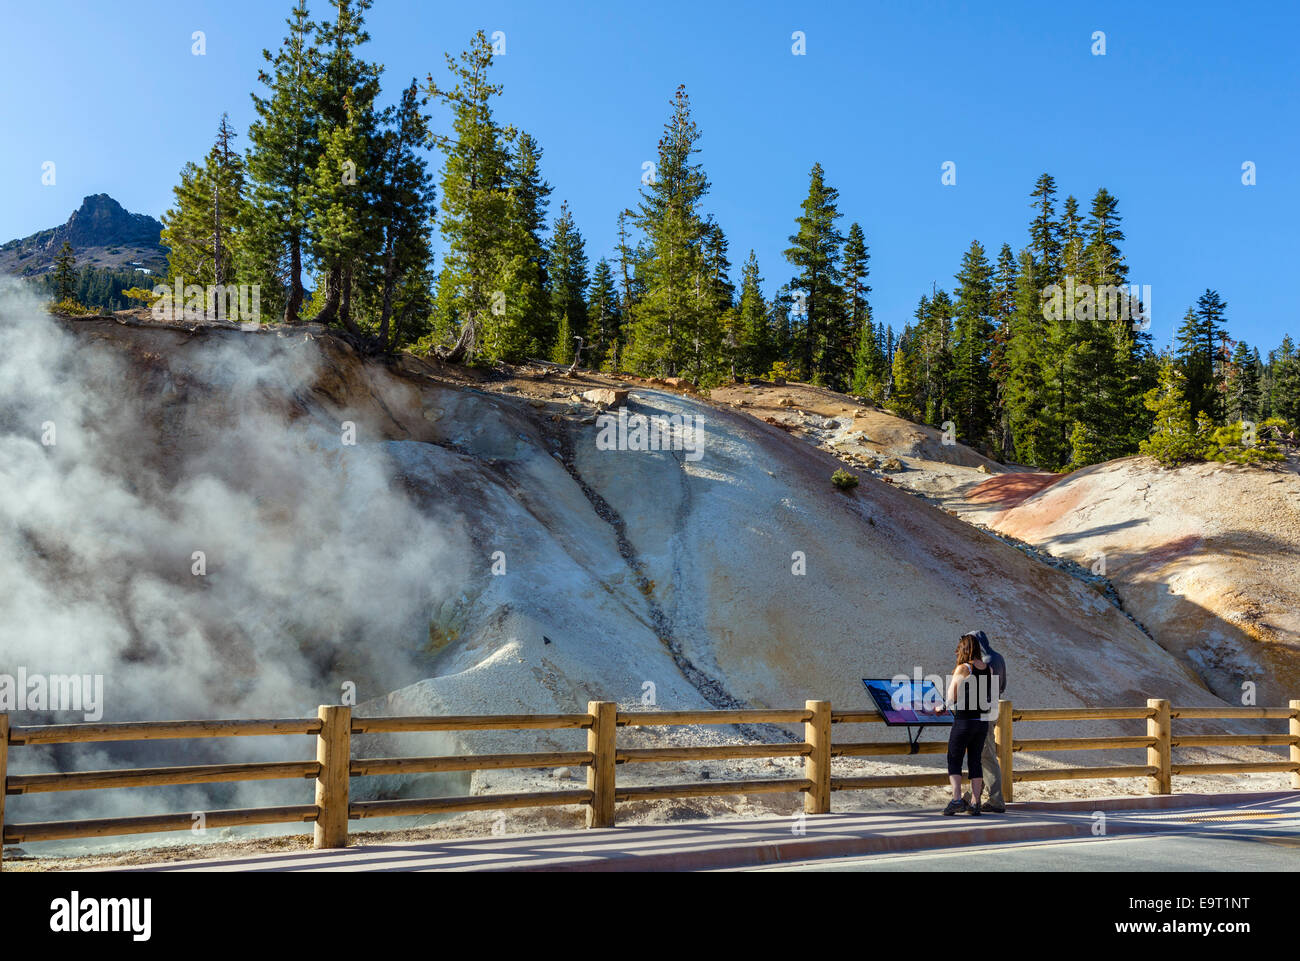 Hot springs and fumaroles at the Sulphur Works geothermal area, Lassen Volcanic National Park, Northern California, USA Stock Photo